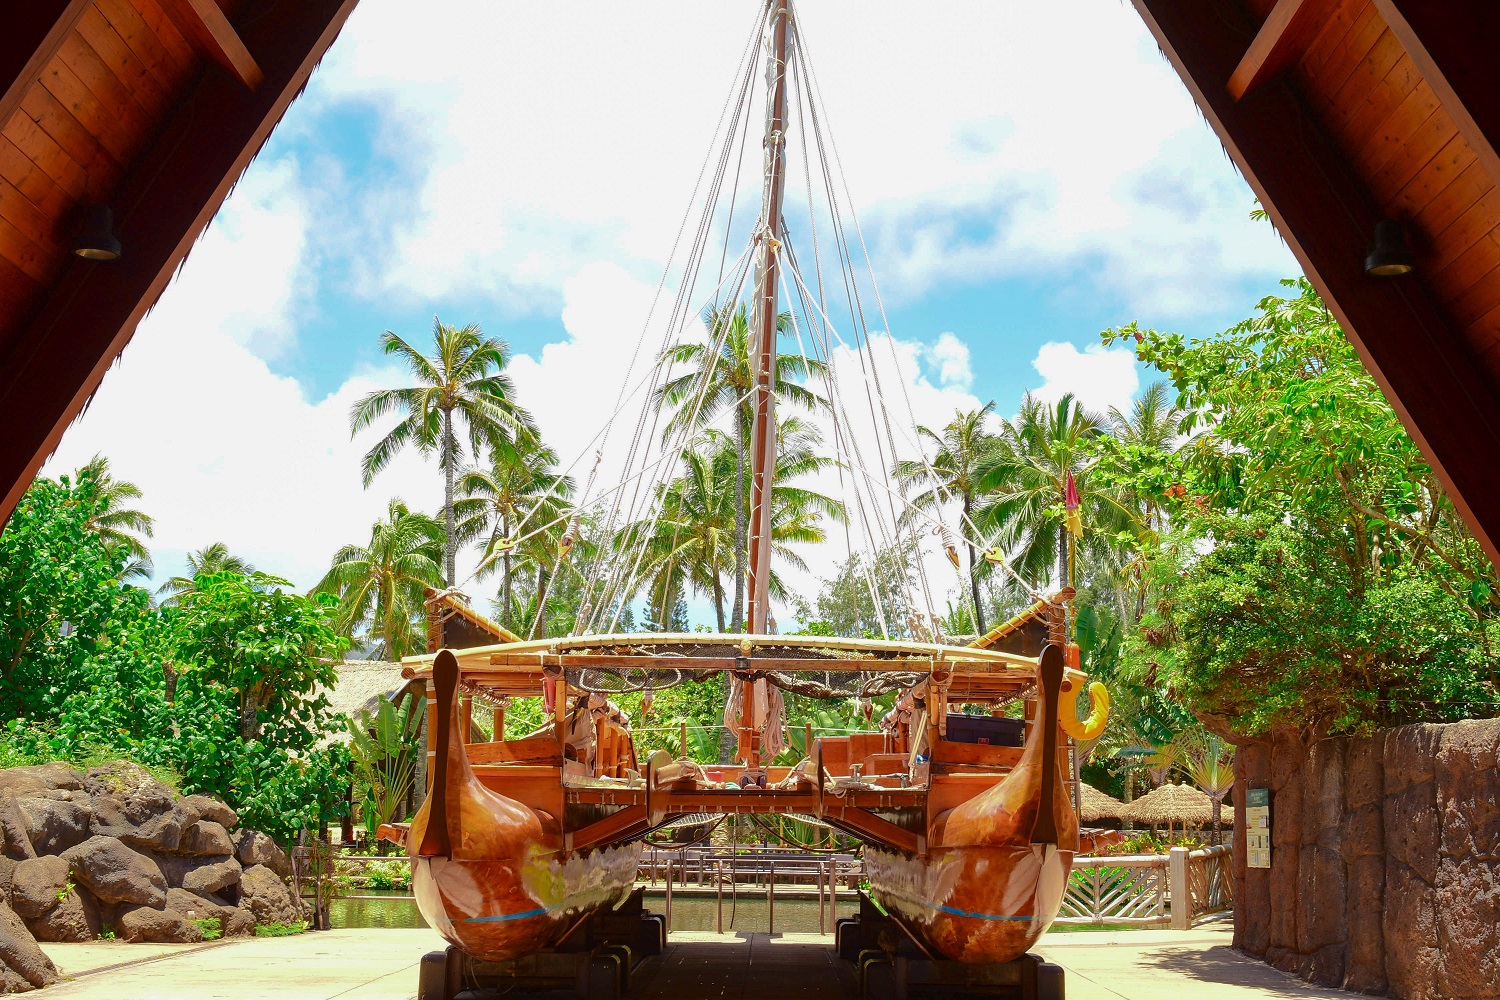 photo of the Iosepa, a doubled hulled sailing vessel used for teaching ancient Polynesian navigational skills. When it is dry-docked, it is housed on the Polynesian Cultural Center's campus